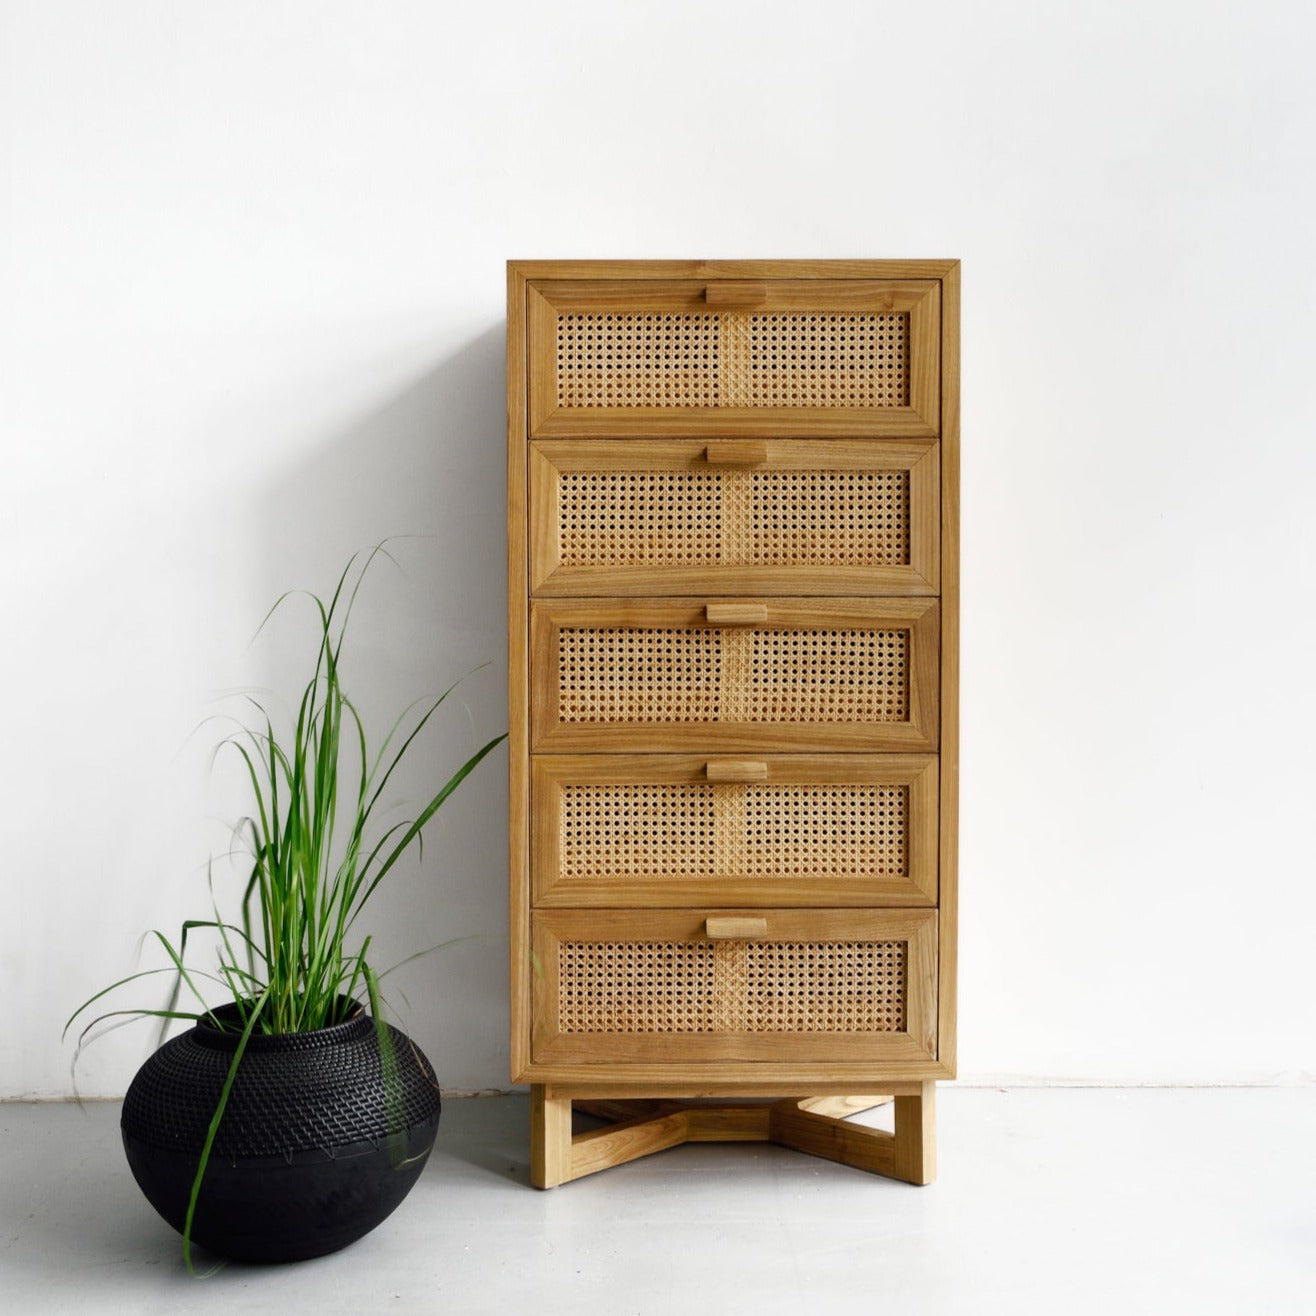 Sunshine Chest of drawers - Furniture